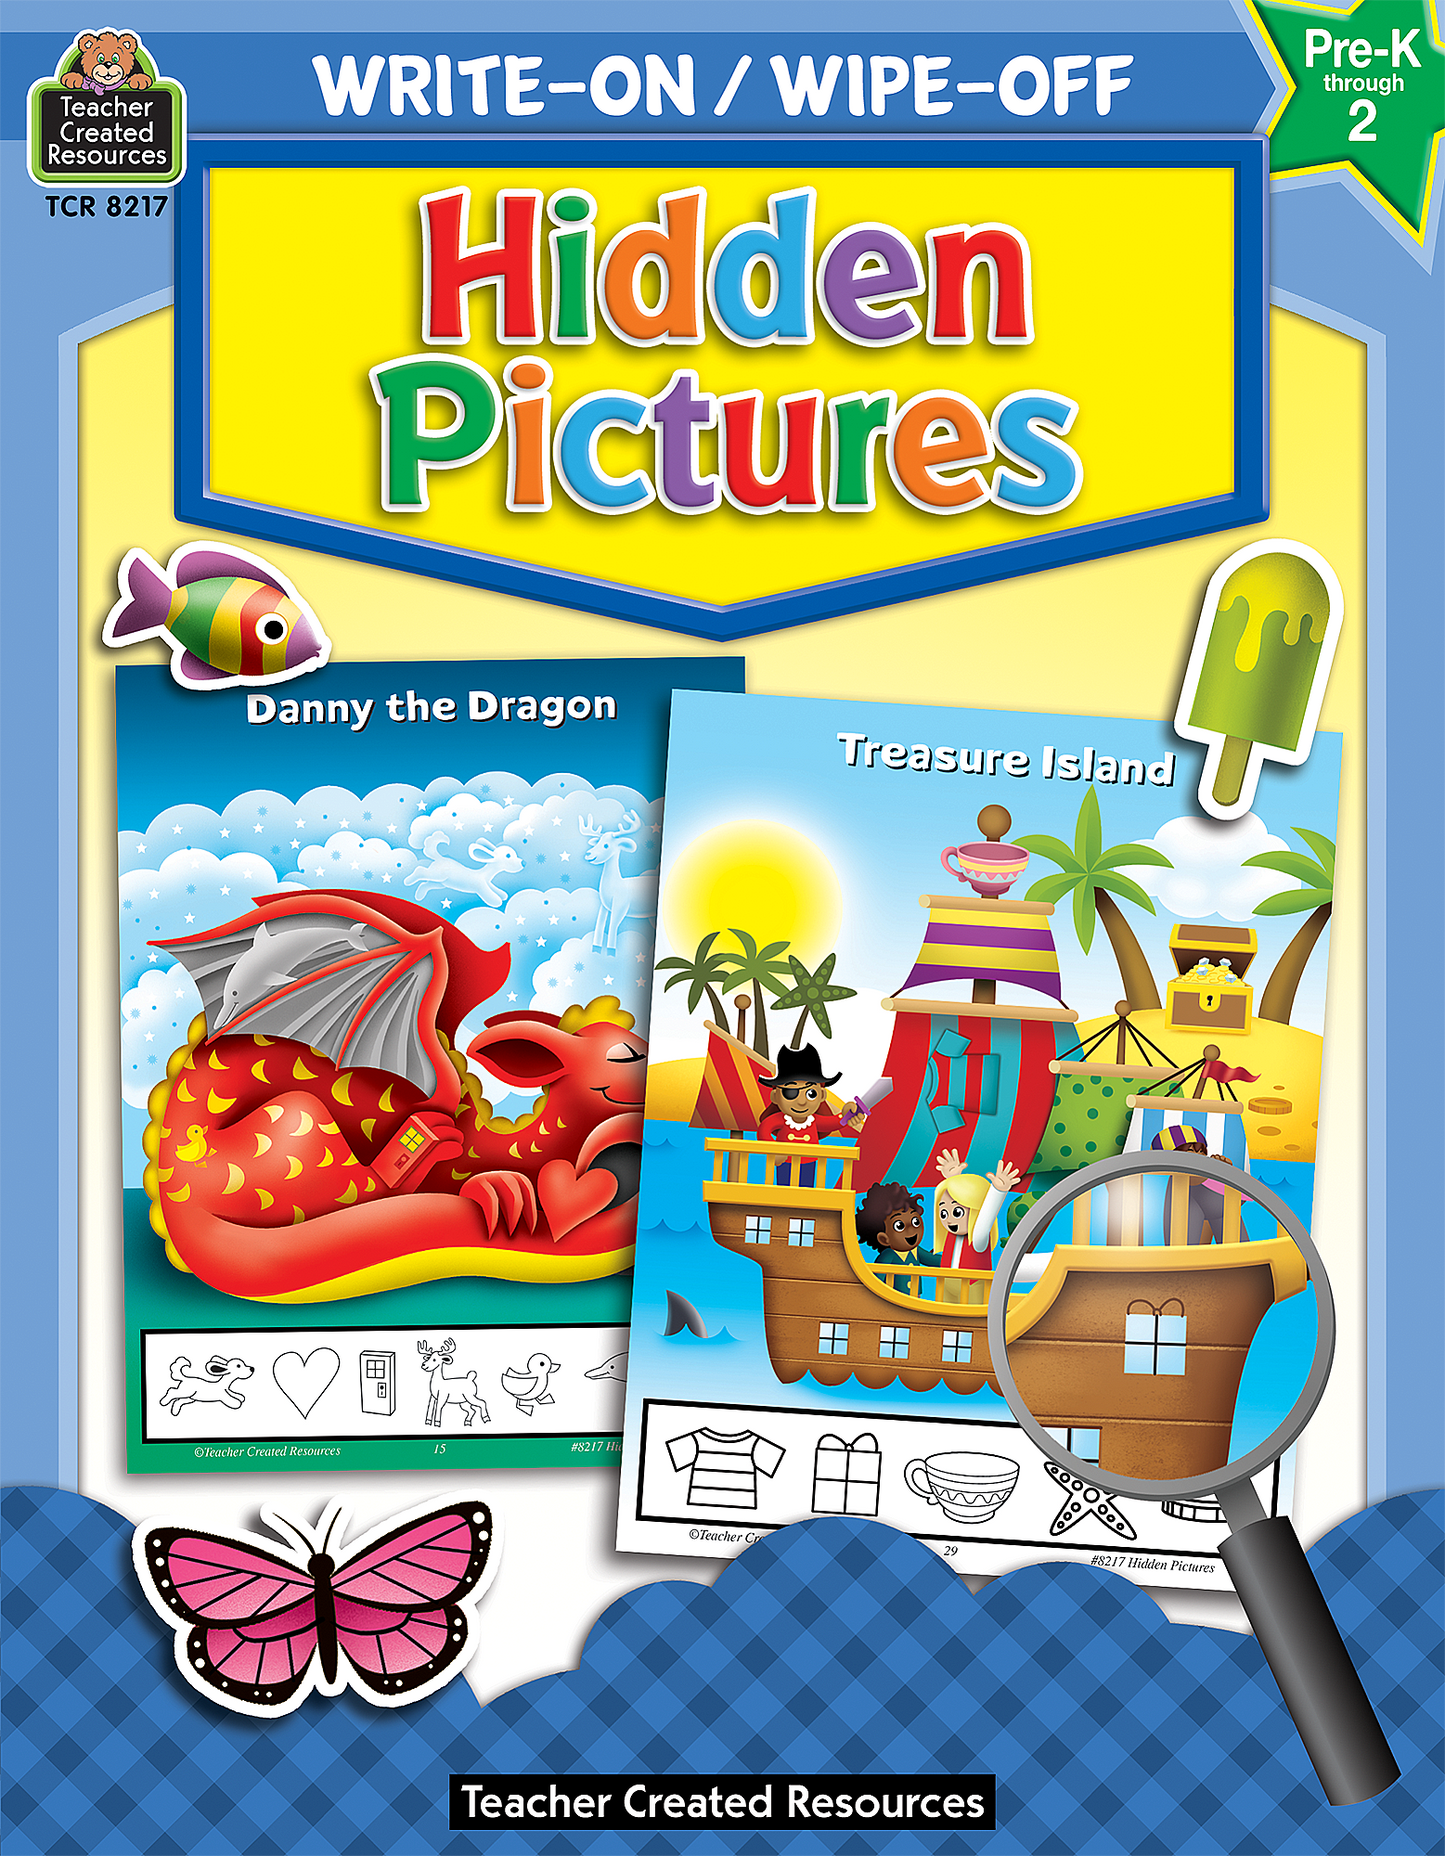 Write-On/Wipe-Off: Hidden Pictures